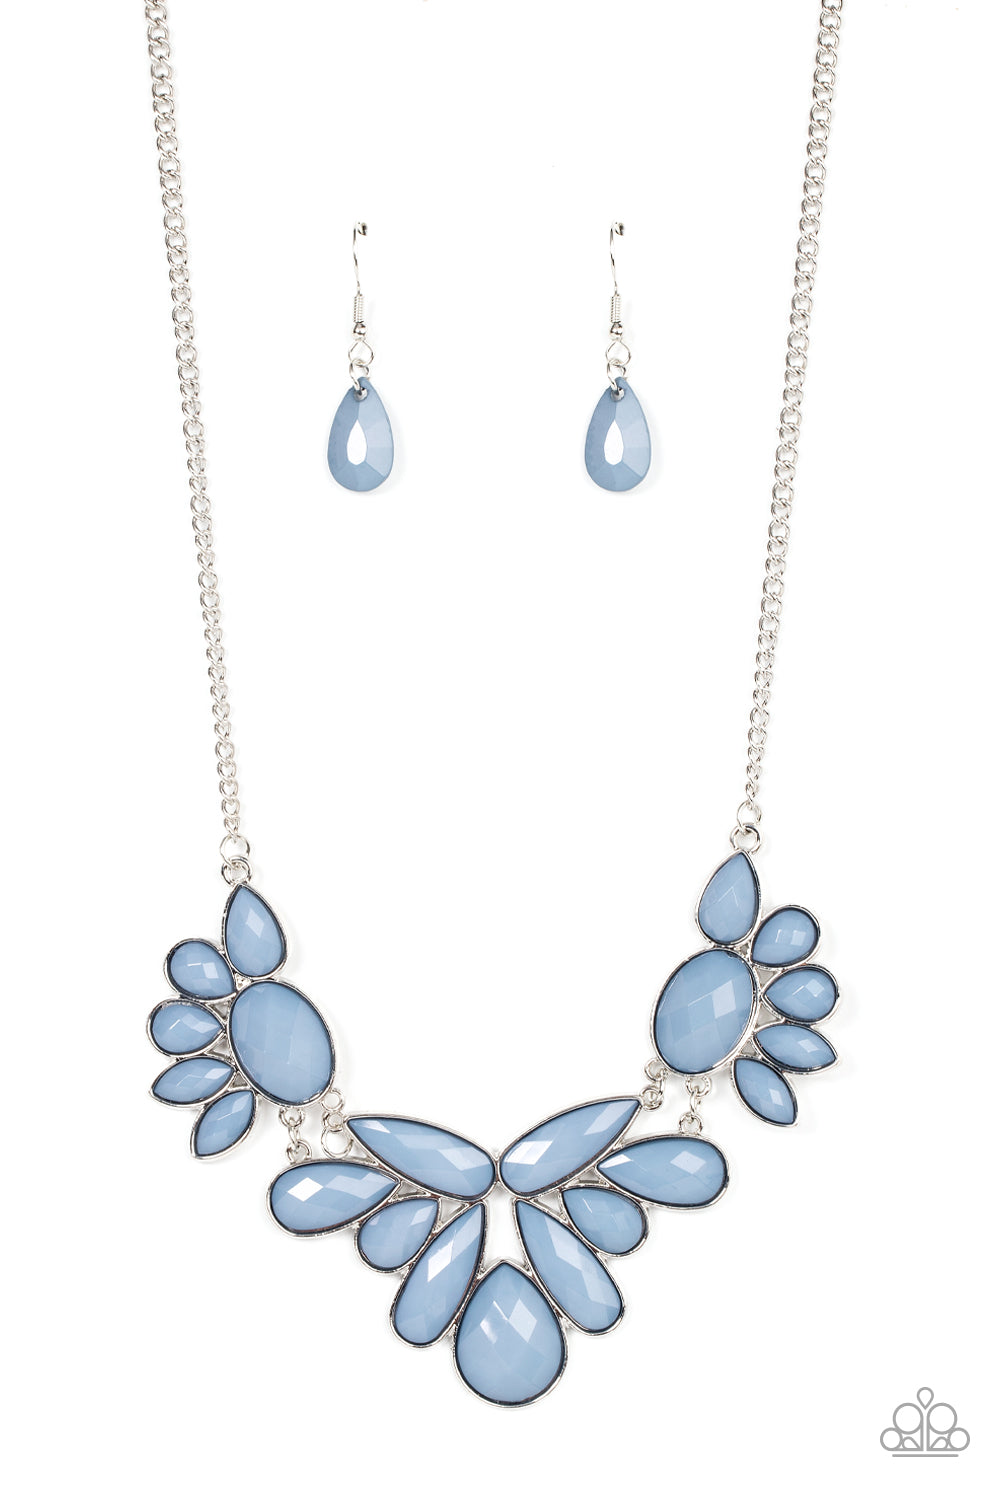 A Passing FAN-cy Blue Necklace